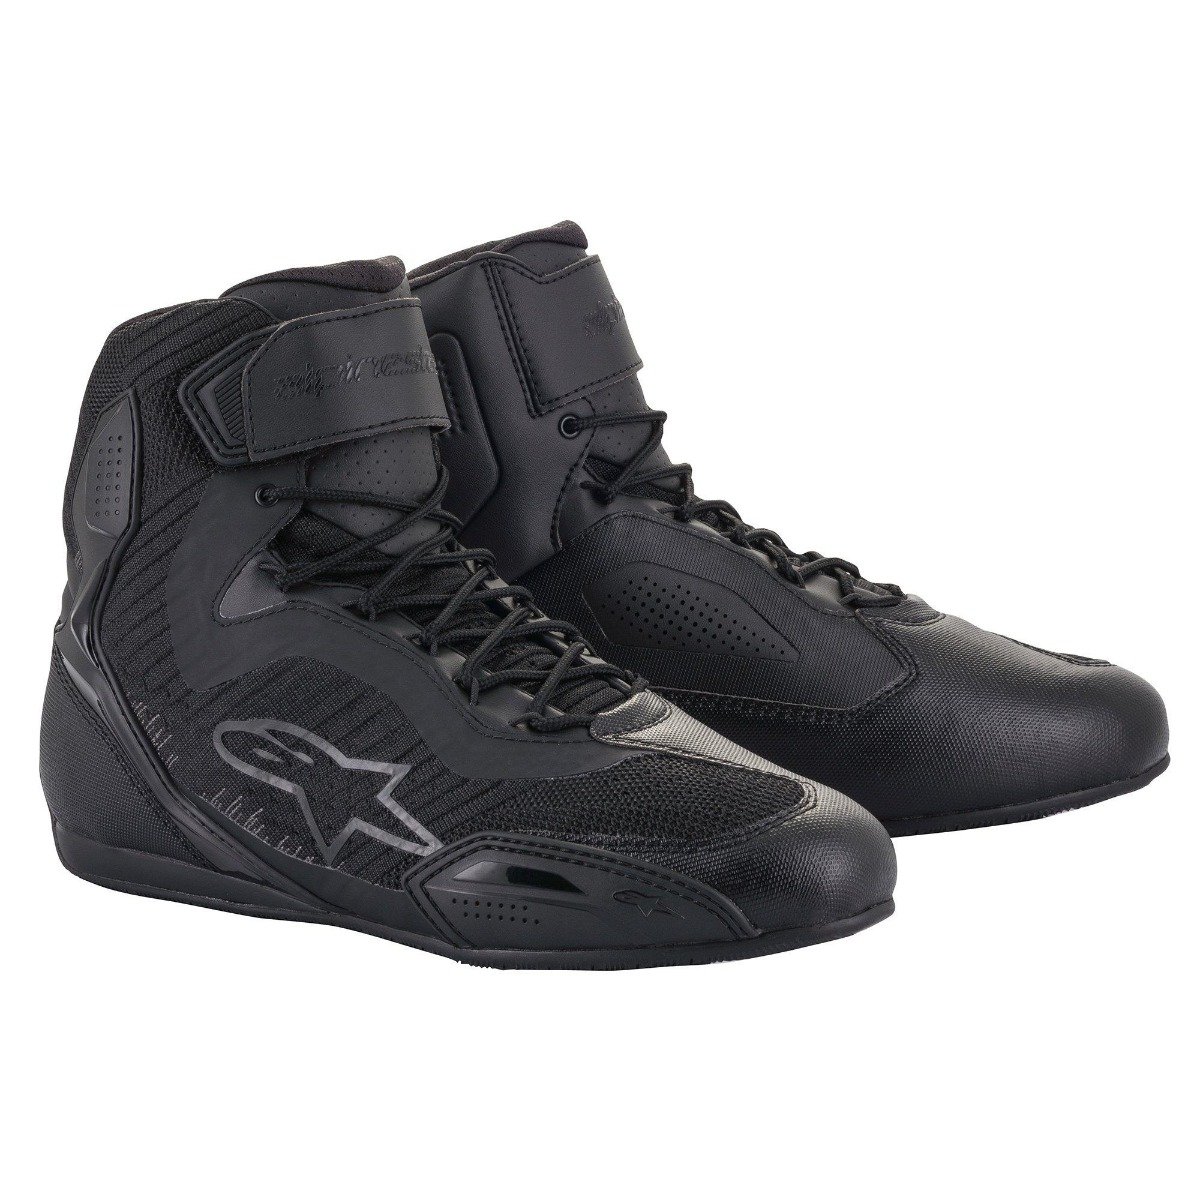 Image of Alpinestars Stella Faster-3 Rideknit Noir Anthracite Chaussures Taille US 55